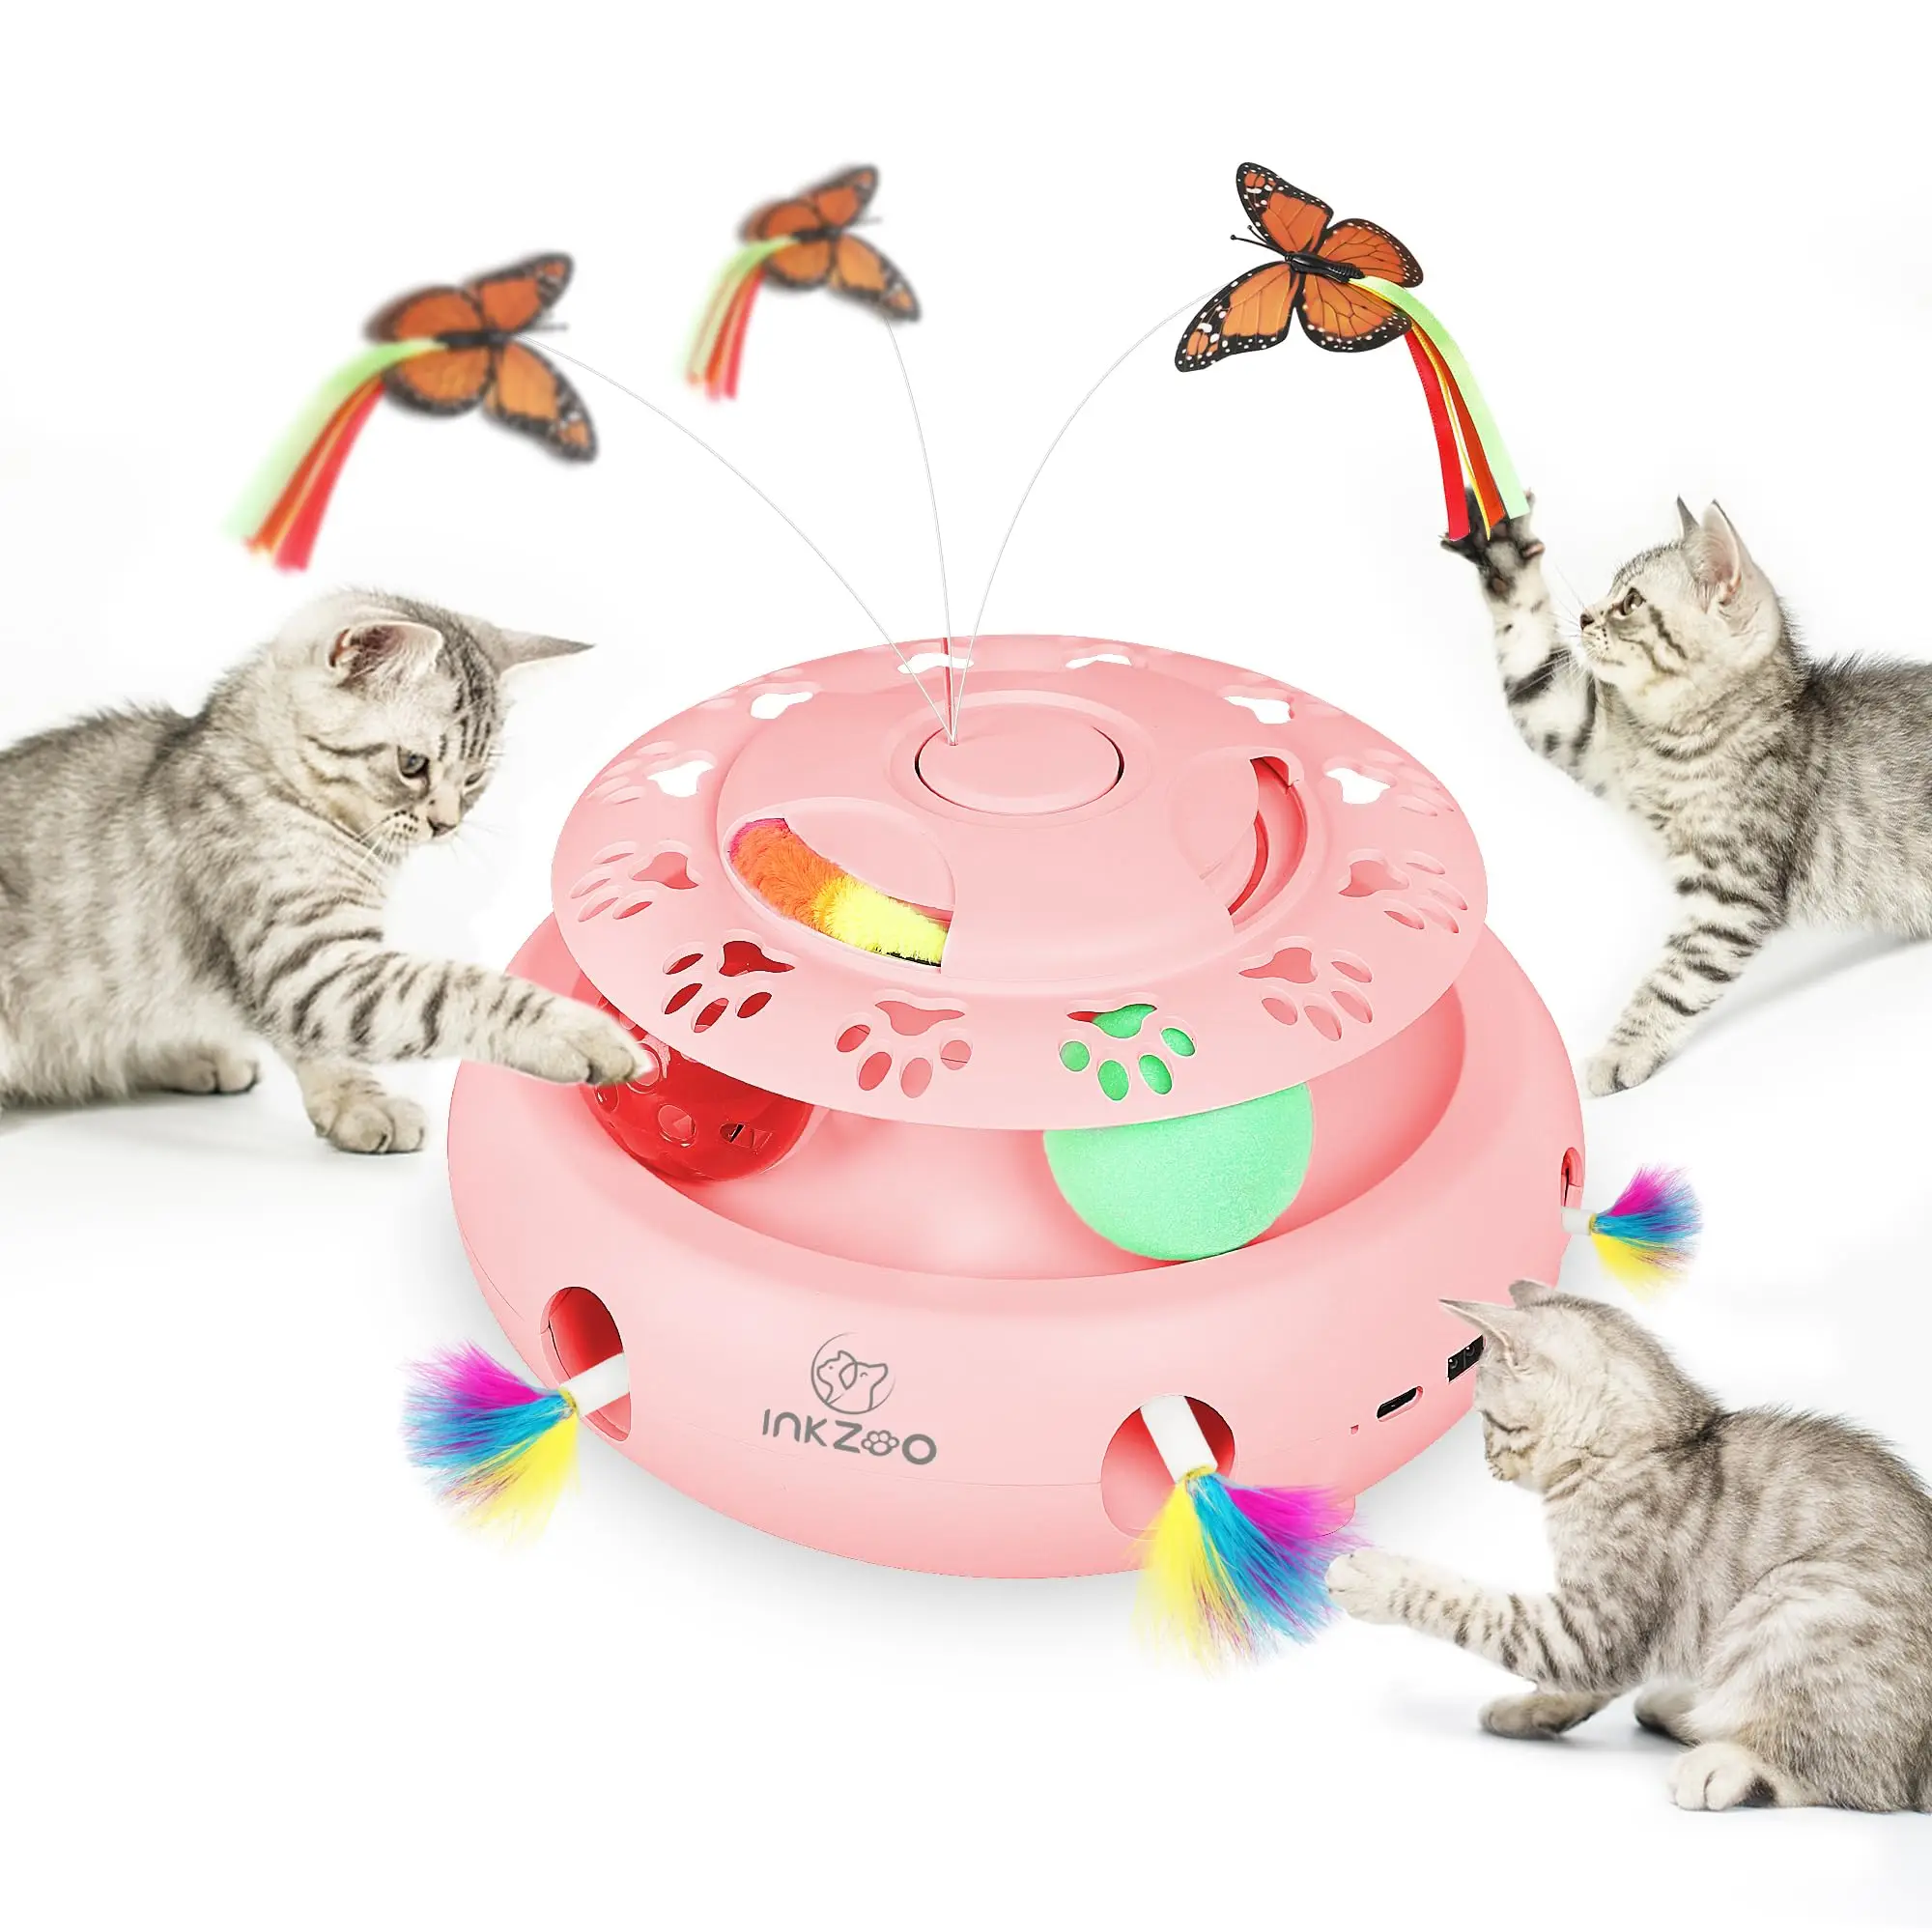 The Interactive Cat Toy: Promoting Exercise, Engagement, and Fun插图4